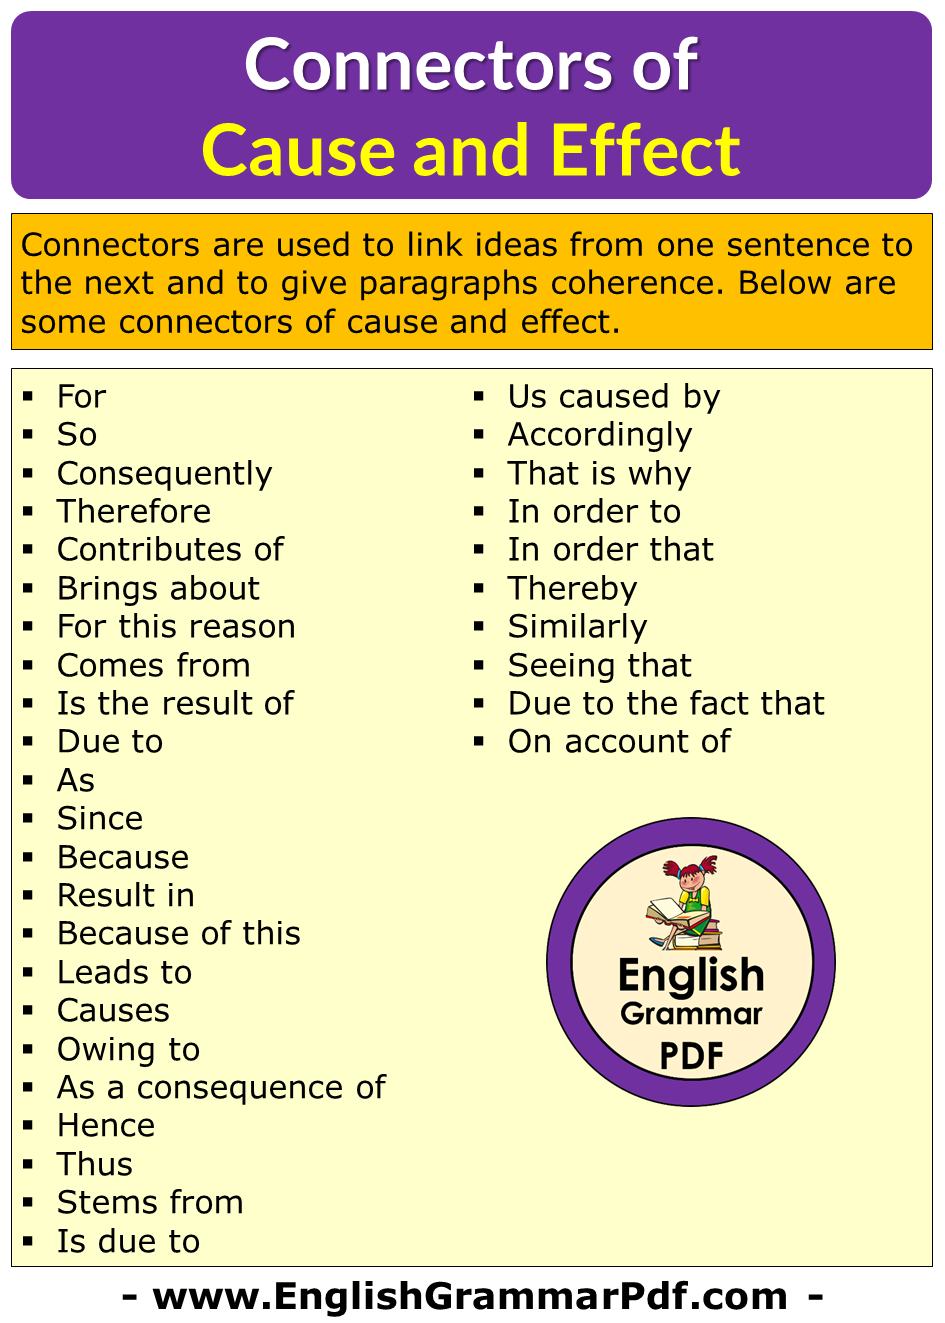 Connectors of Cause & Effect List in English